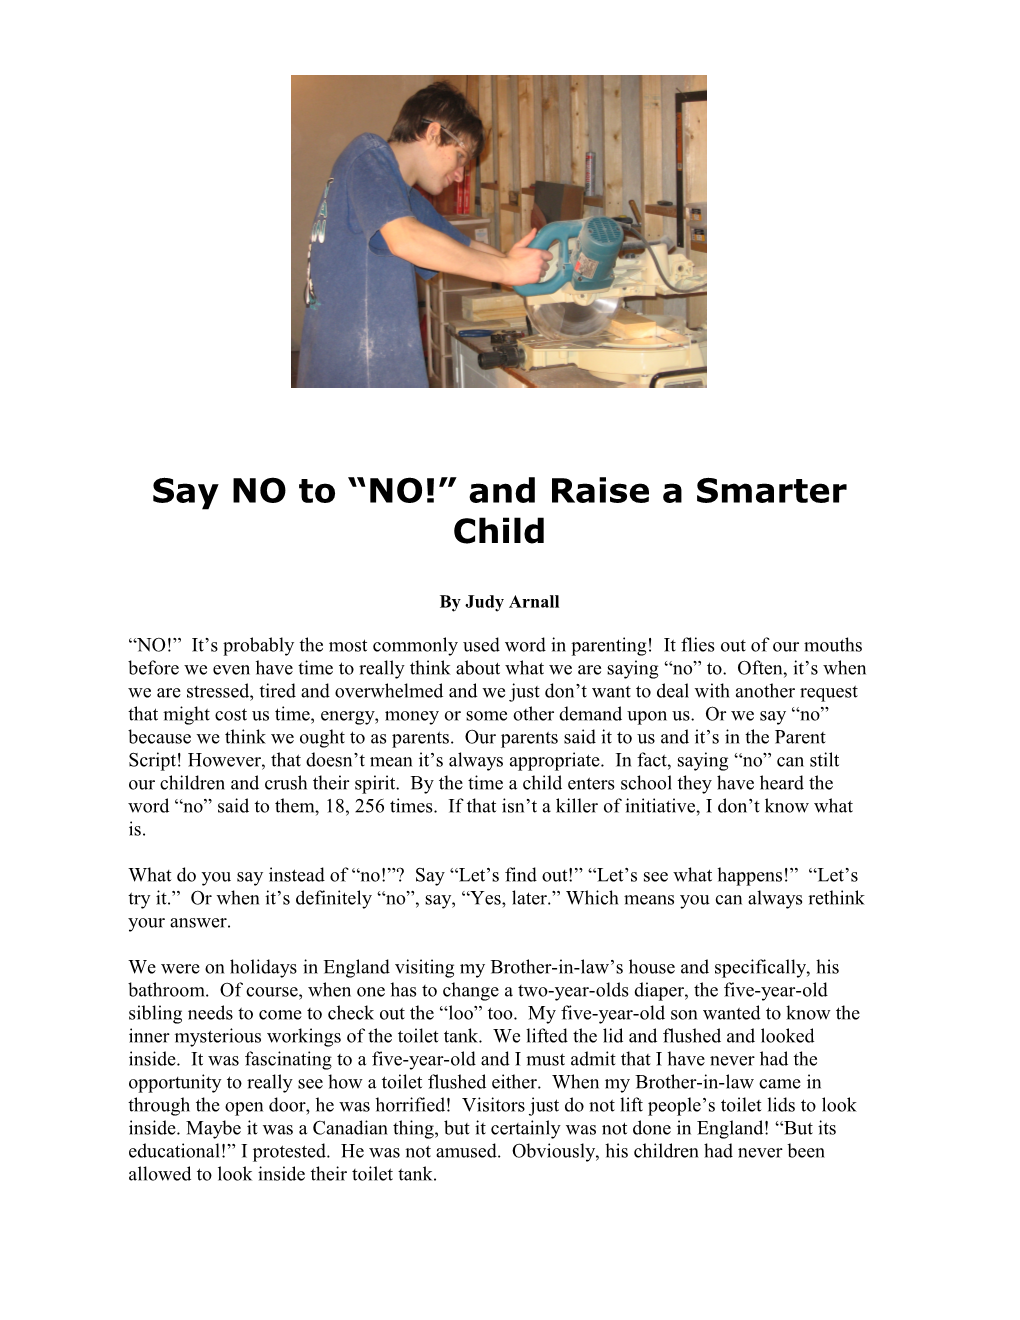 Say NO to NO! and Raise a Smarter Child